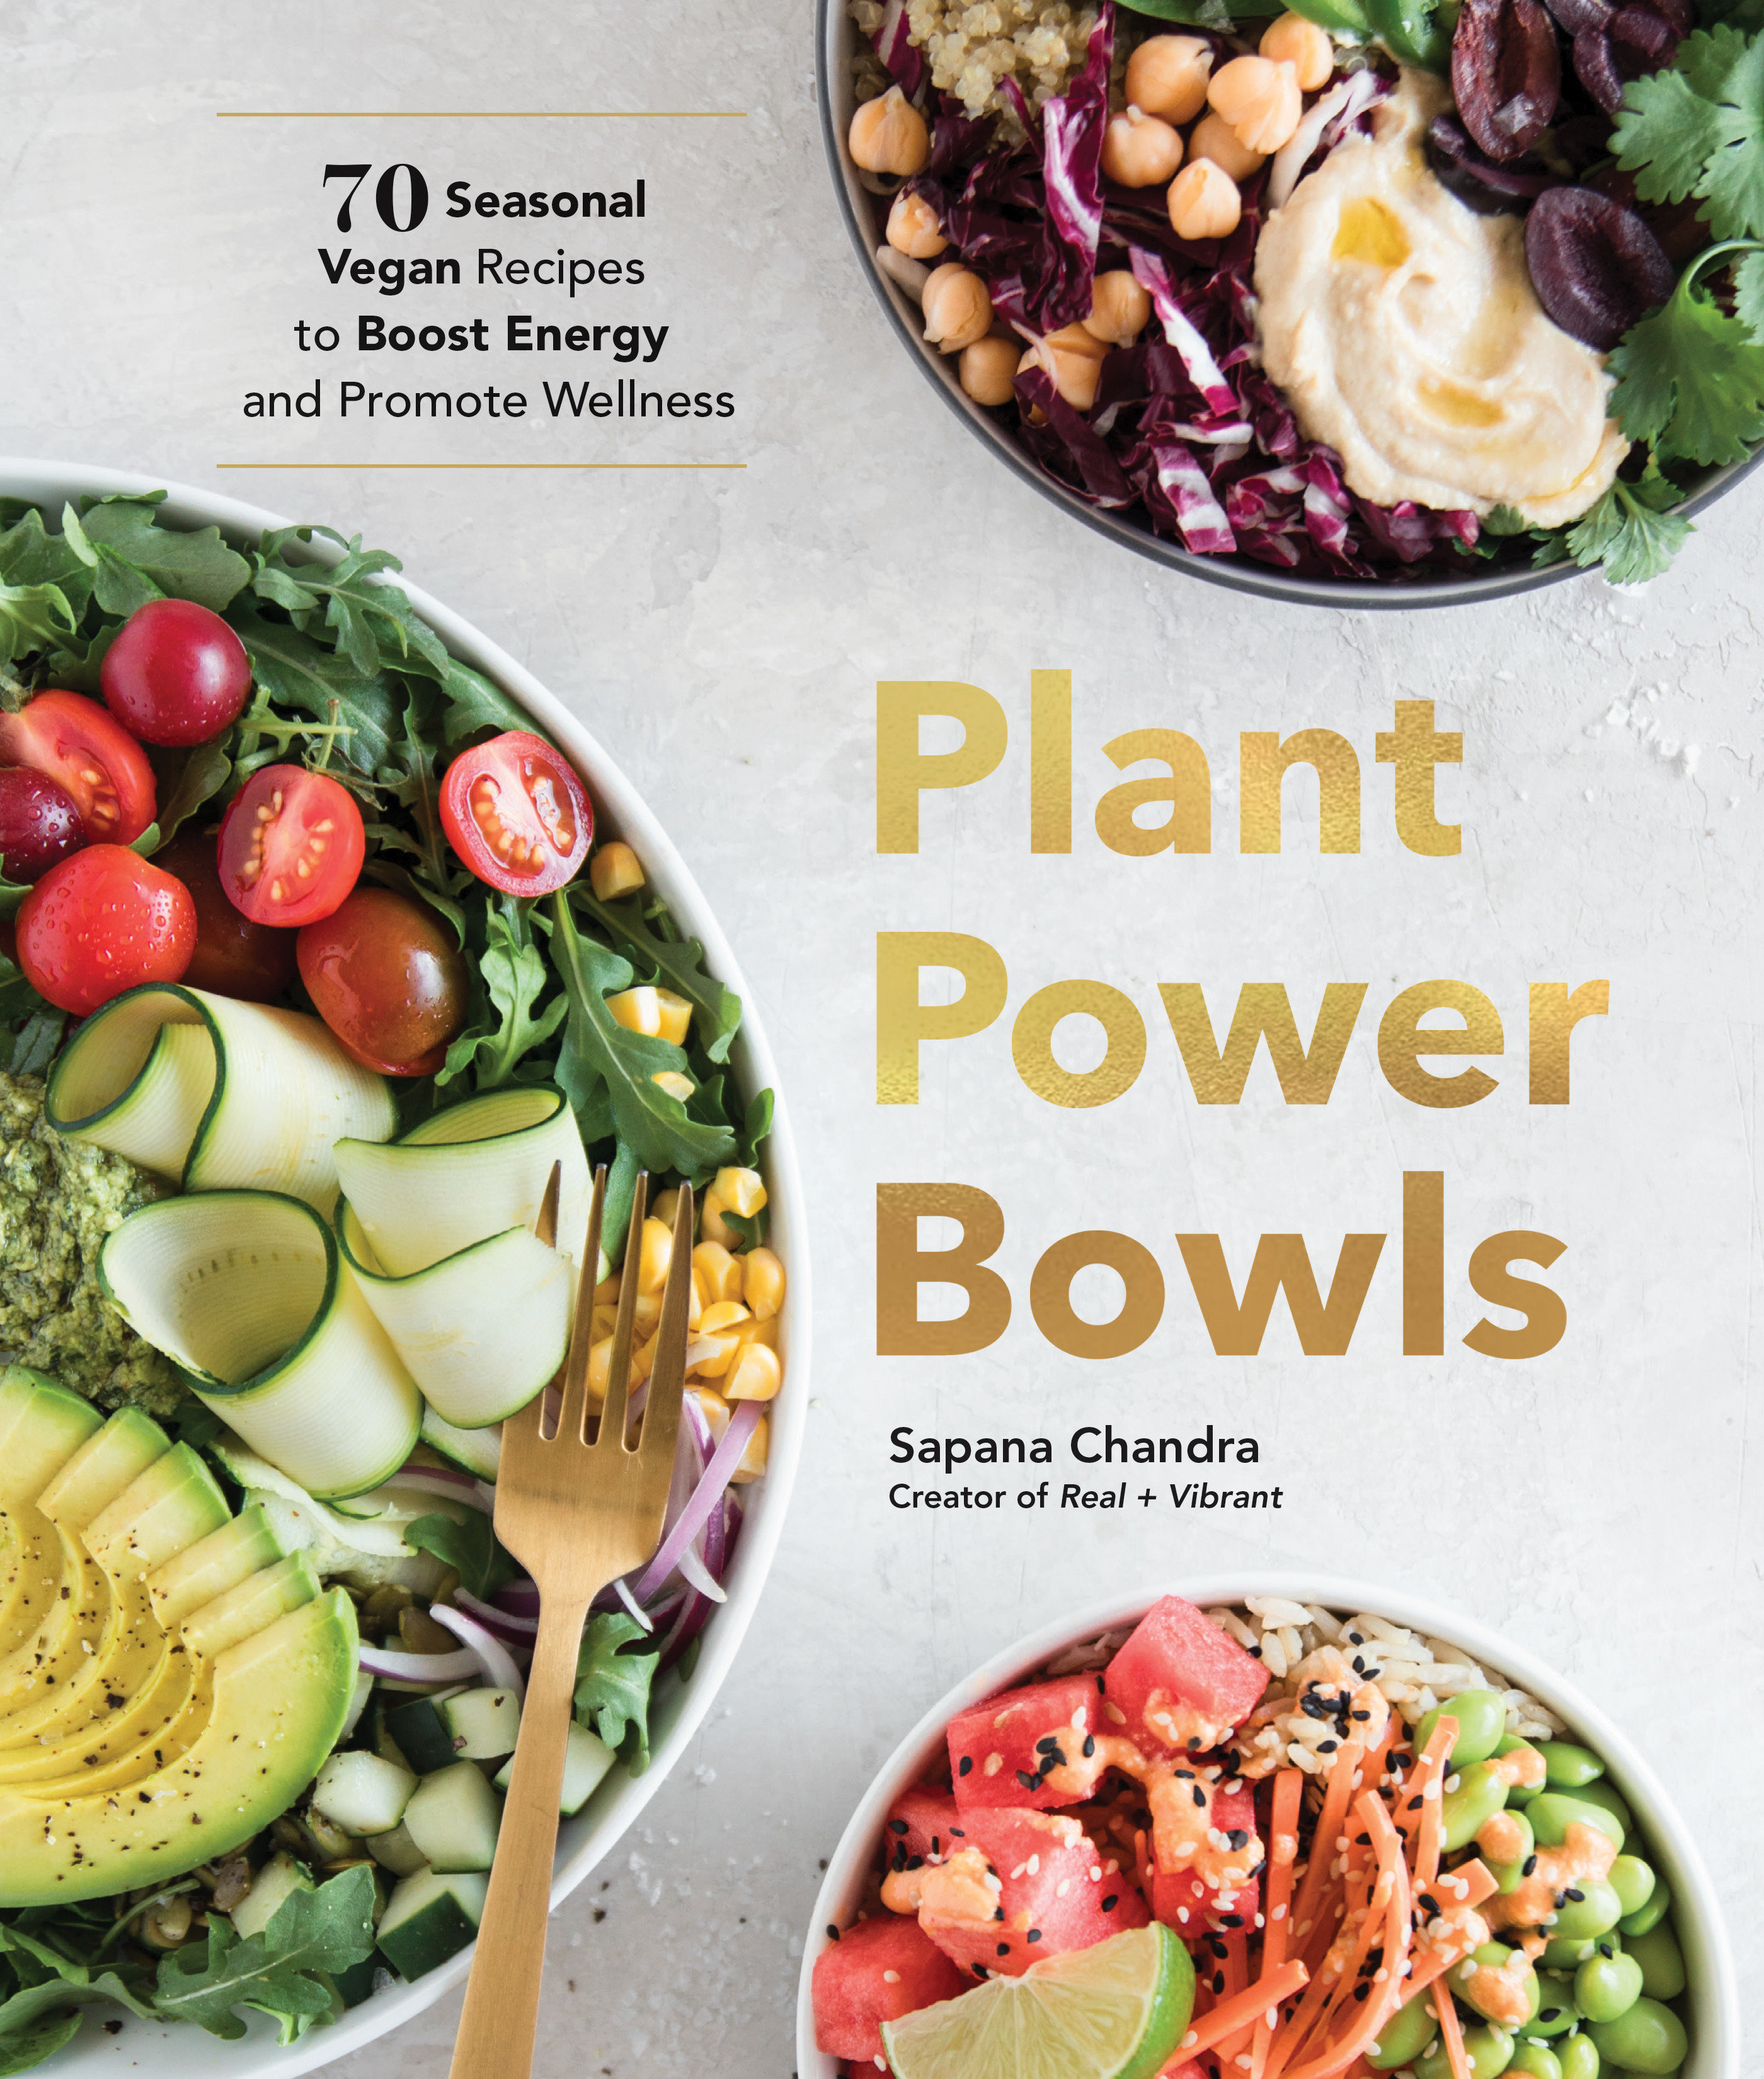 Plant power bowls 70 seasonal vegan dishes to boost energy and promote wellness cover image